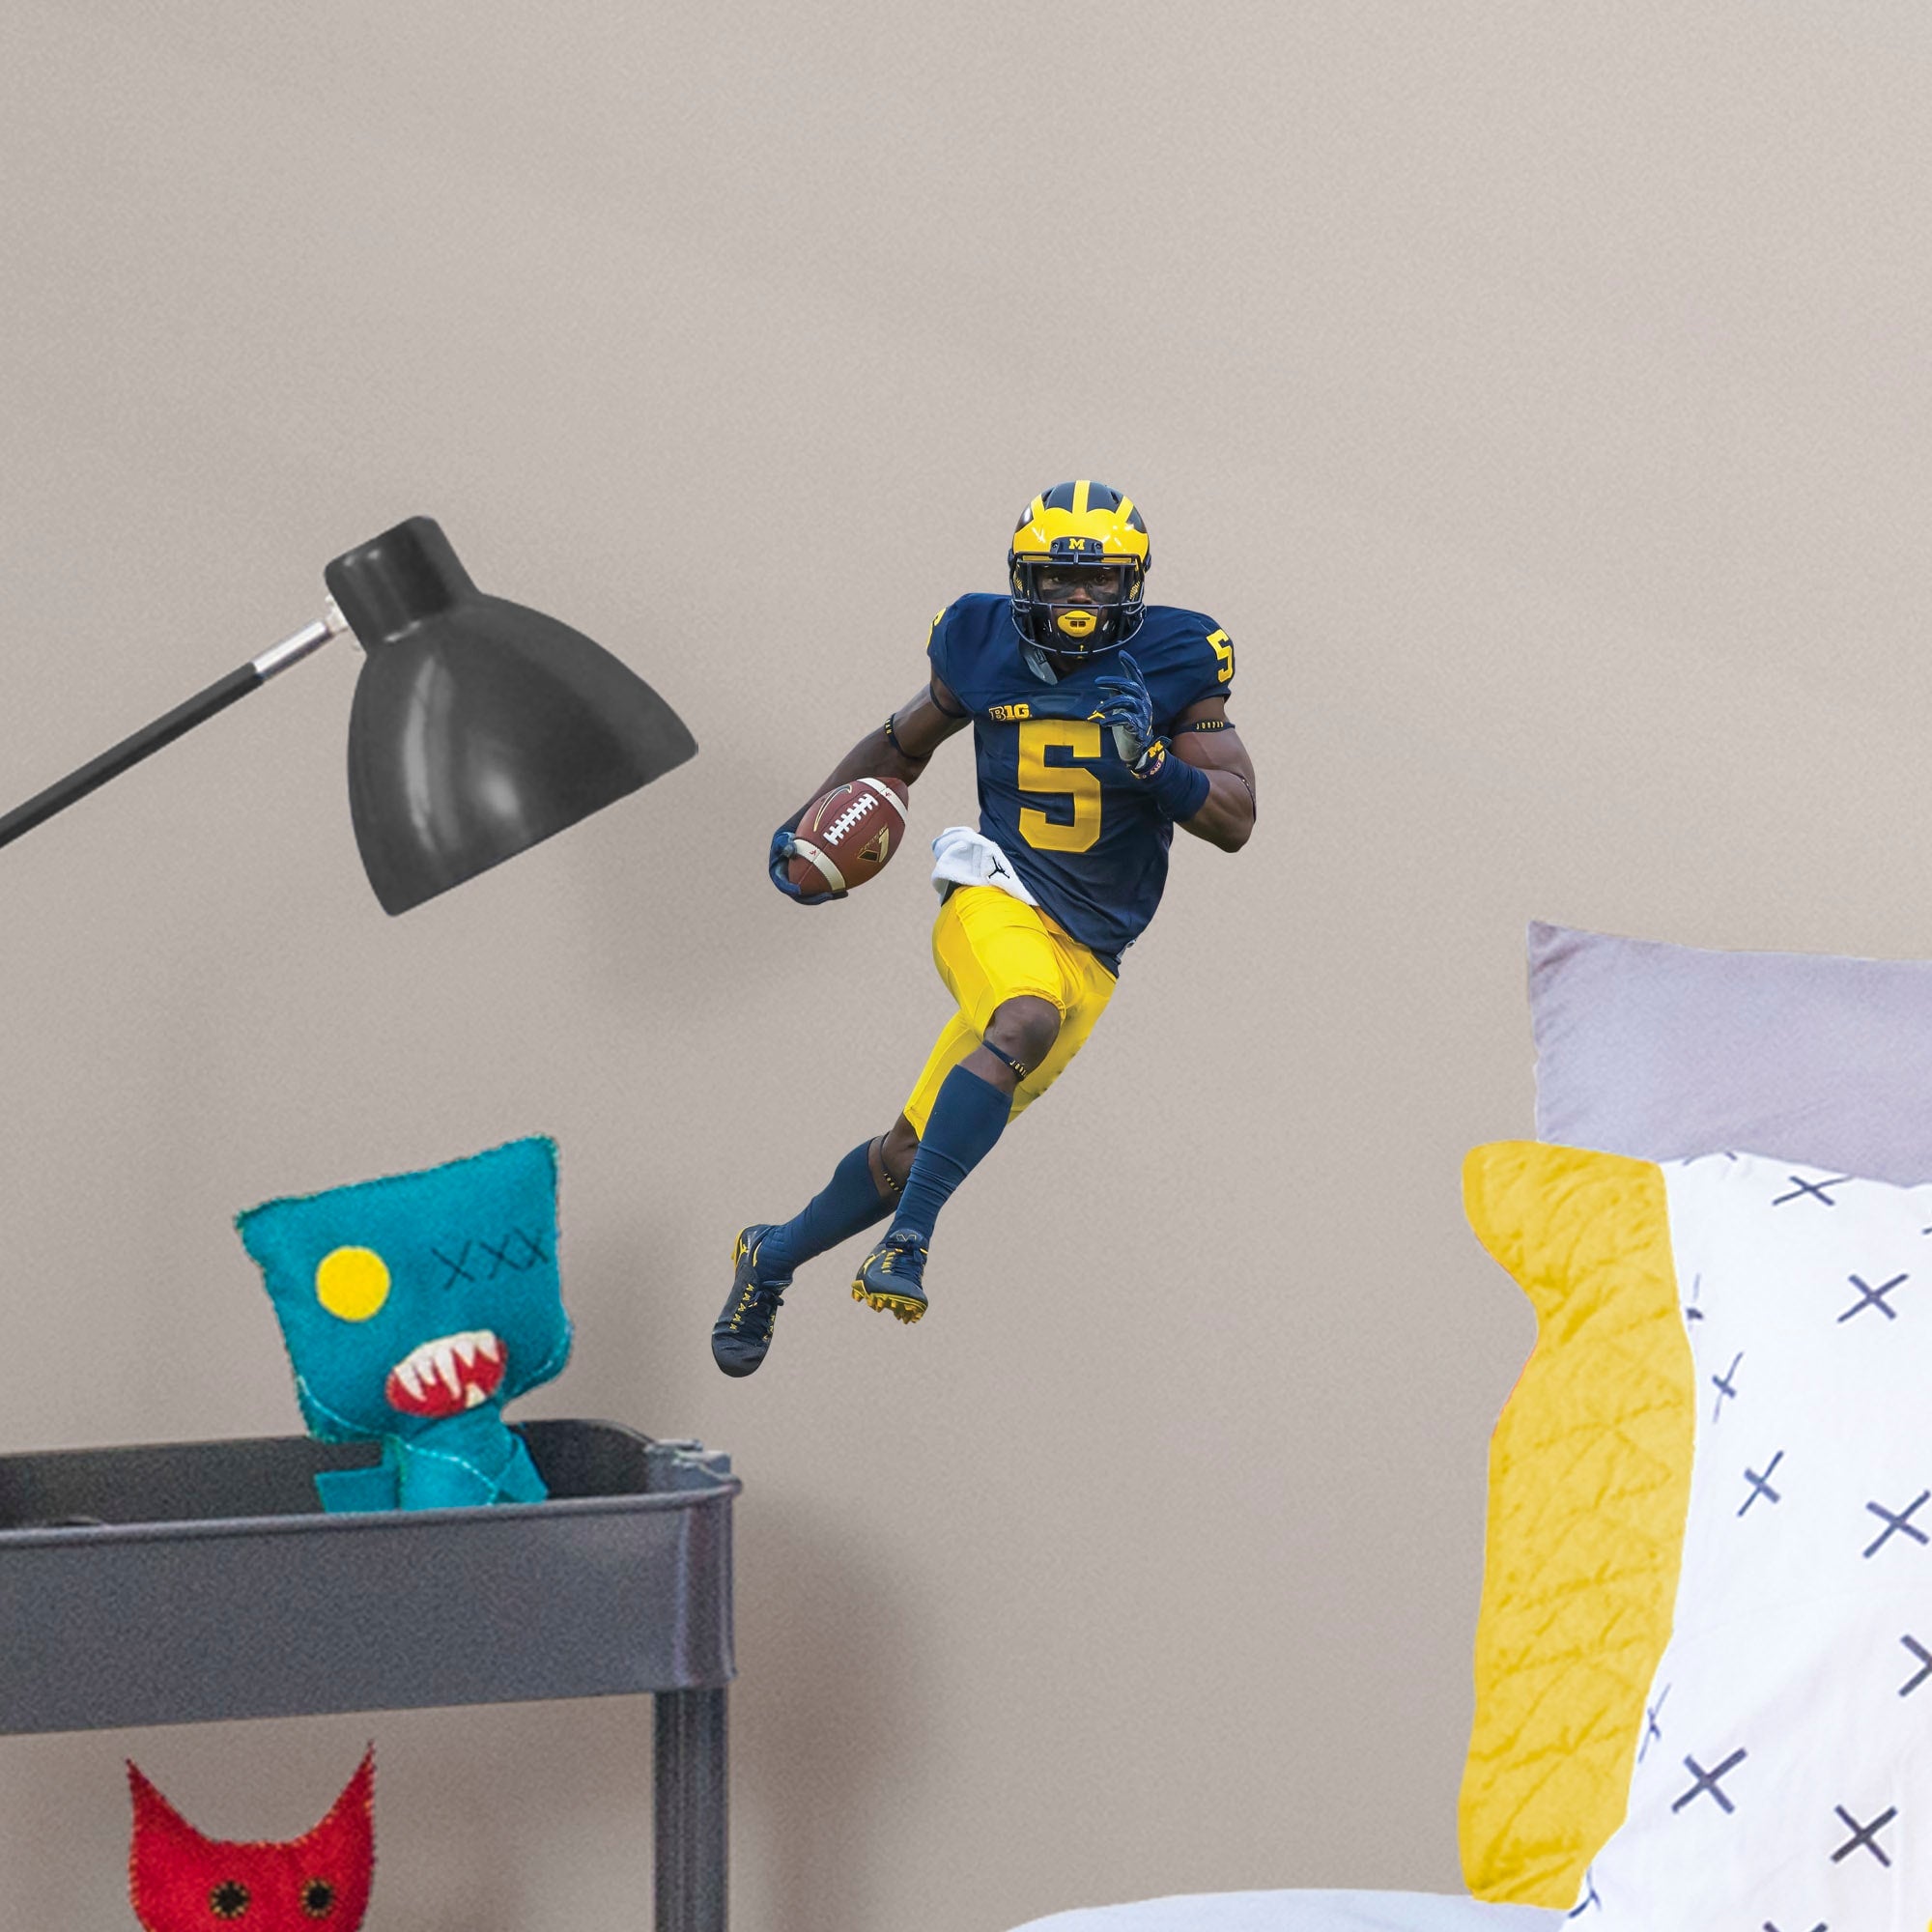 Jabrill Peppers for Michigan Wolverines: Michigan - Officially Licensed Removable Wall Decal Large by Fathead | Vinyl